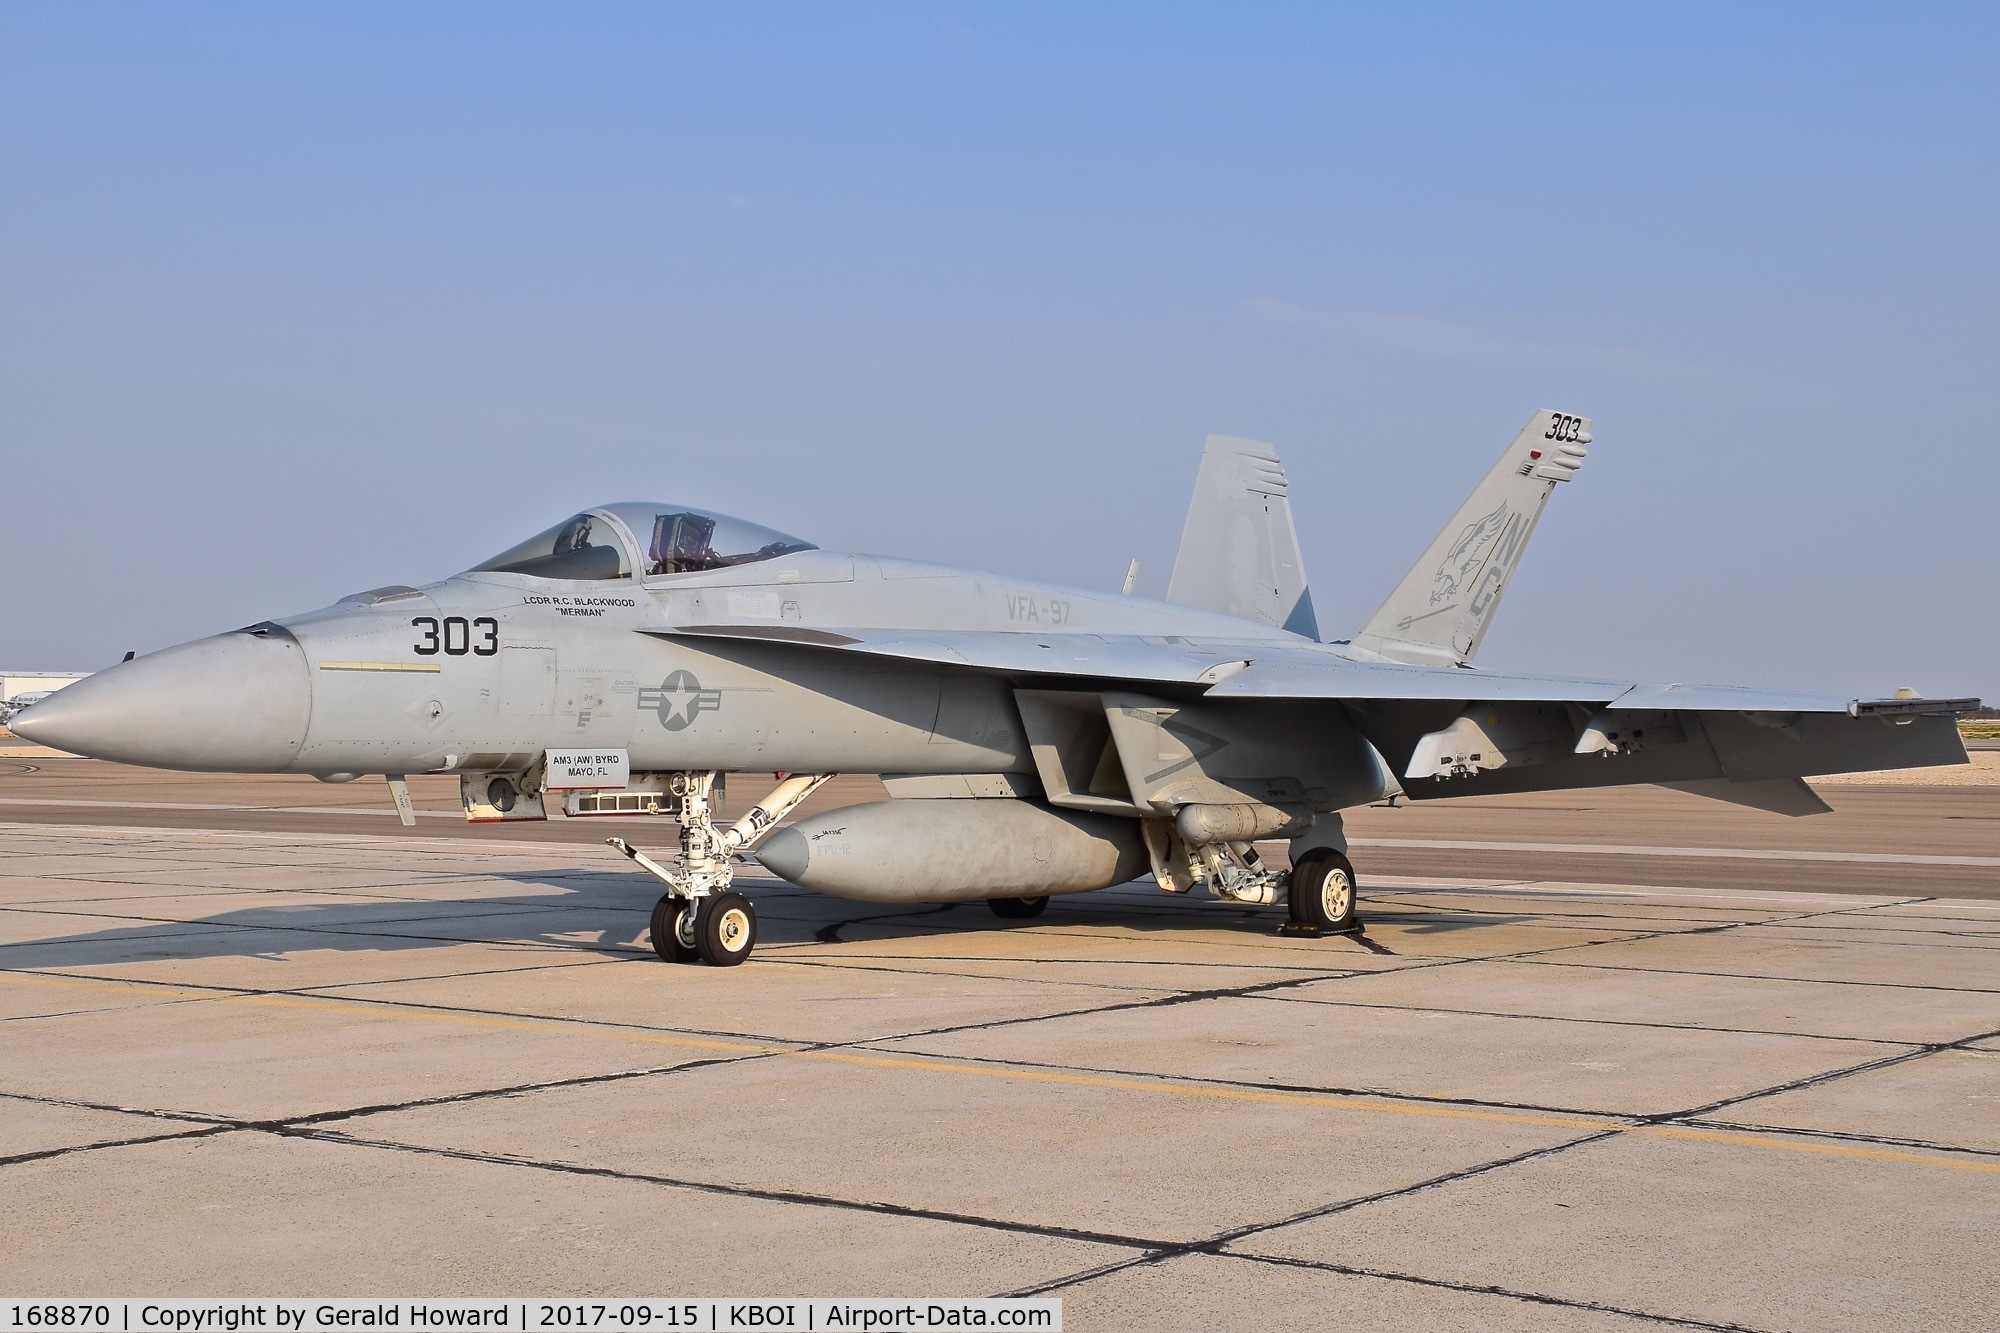 168870, Boeing F/A-18E Super Hornet C/N E-247, Parked on the south GA ramp. VFA-97 